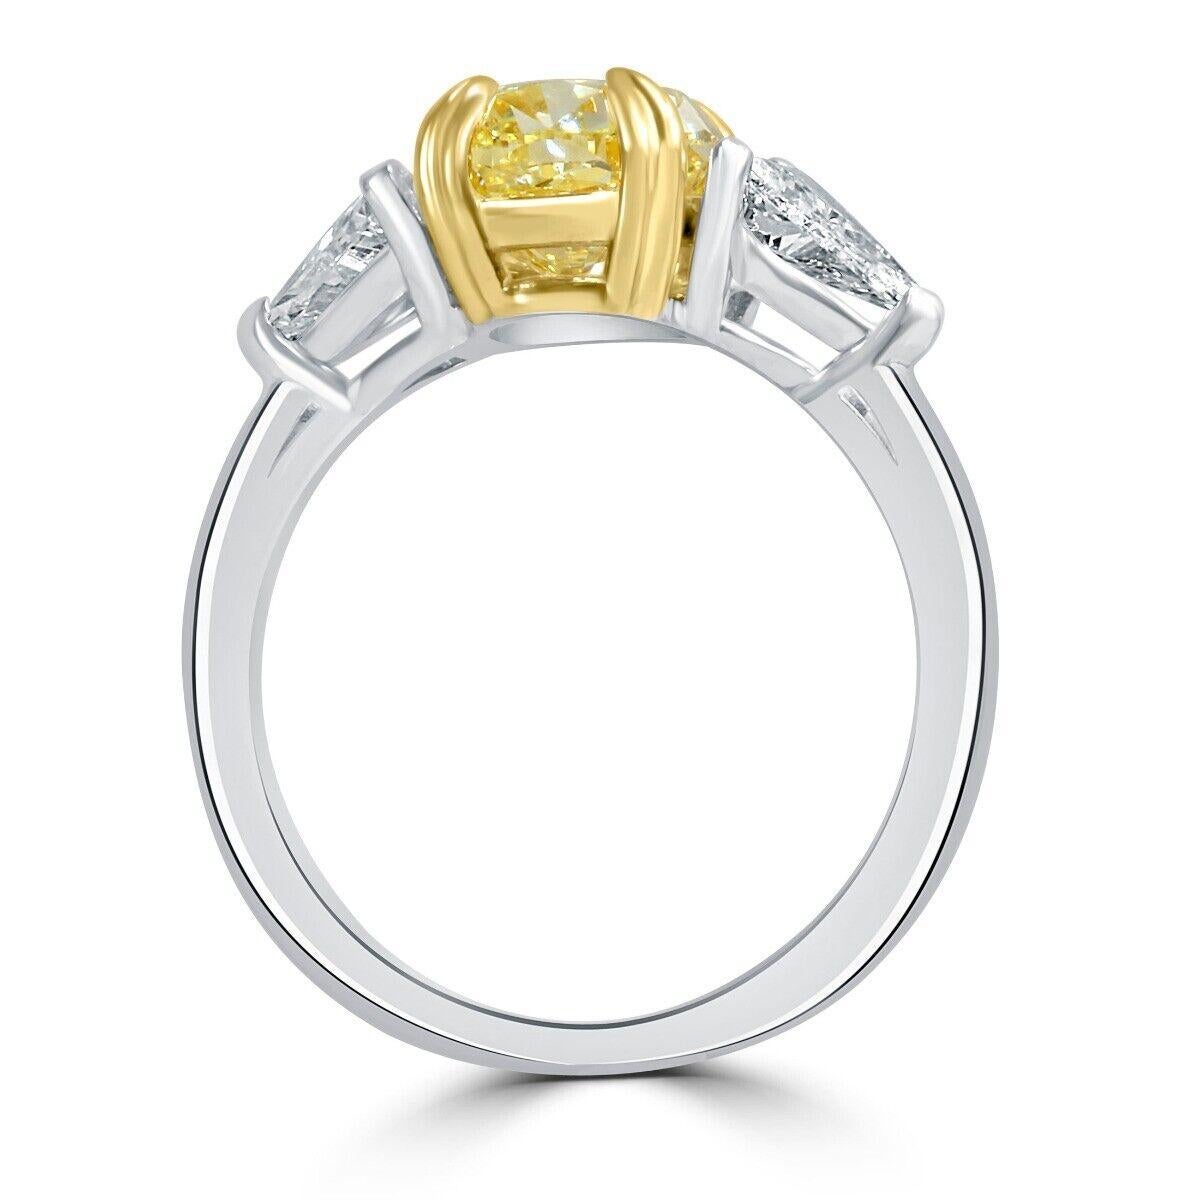 Three stone diamond engagement ring features a 3.10 carat GIA certified oval cut light yellow (U to V Range) diamond center embraced between 2 trillion cut colorless diamonds. Handcrafted in 18k multi tone gold and completed with a high polish